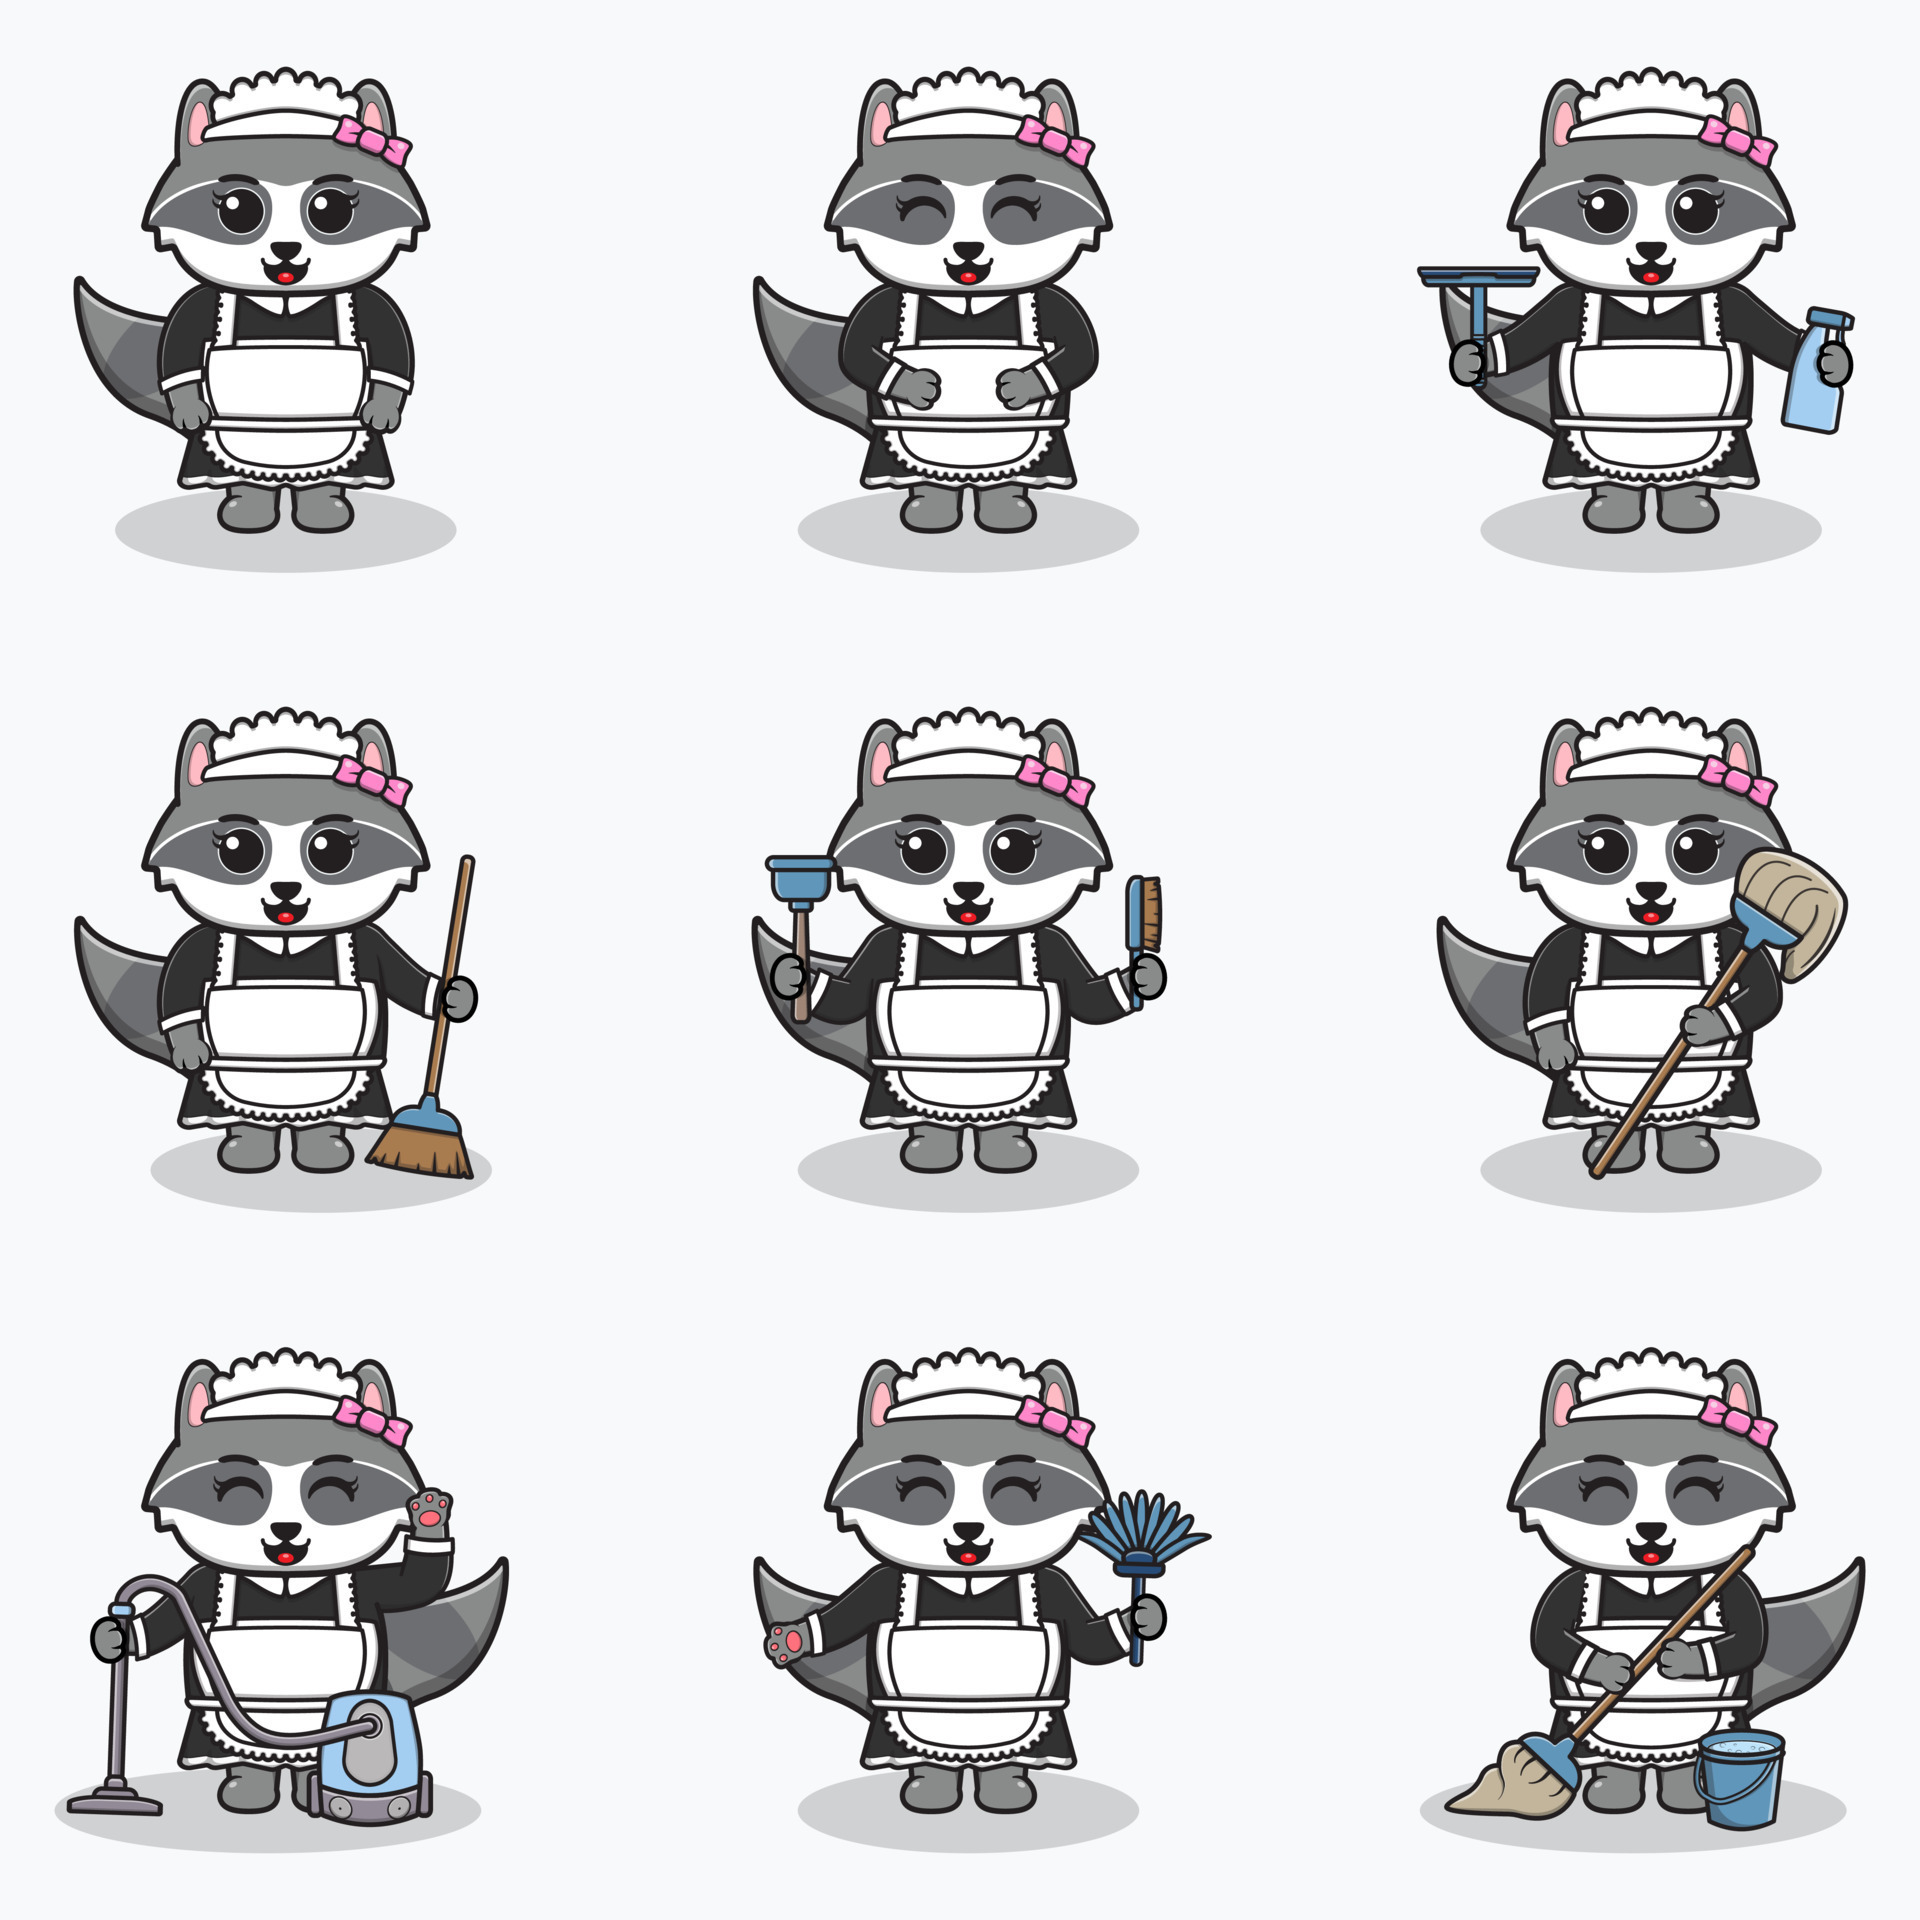 Raccoon stickers Vectors & Illustrations for Free Download